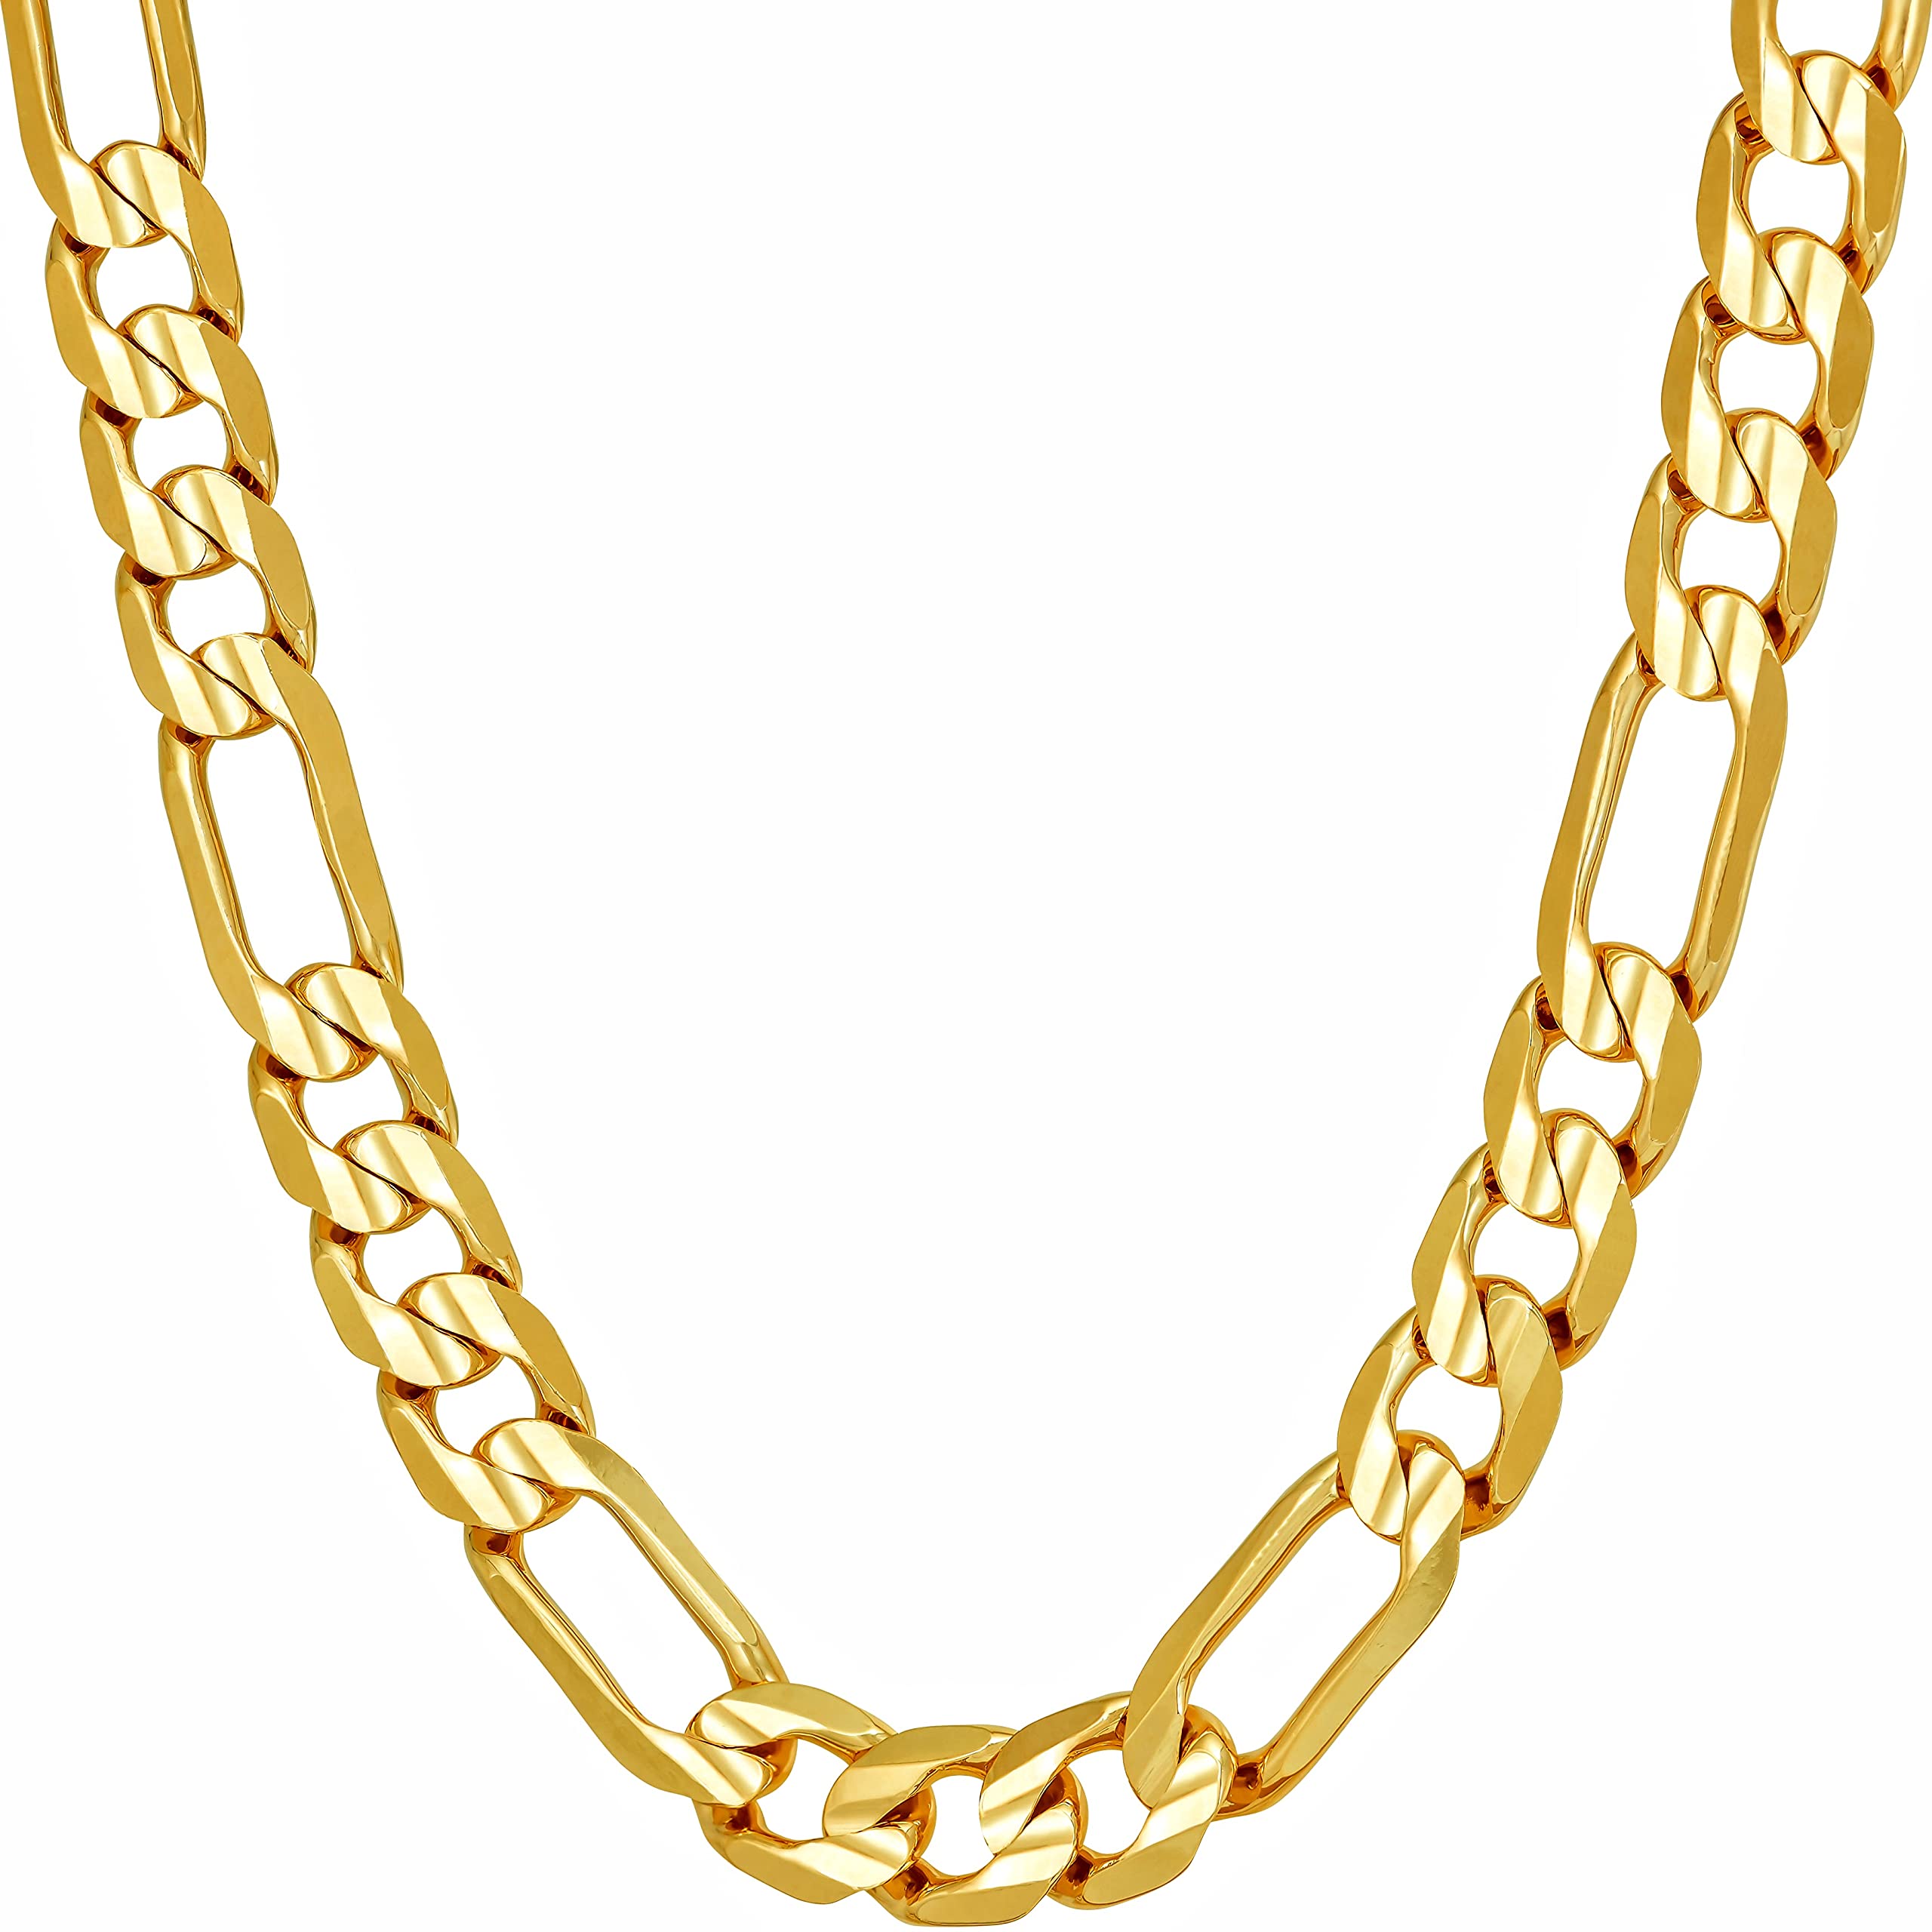 LIFETIME JEWELRY 7mm Figaro Chain Necklace Diamond Cut 24k Real Gold Plated